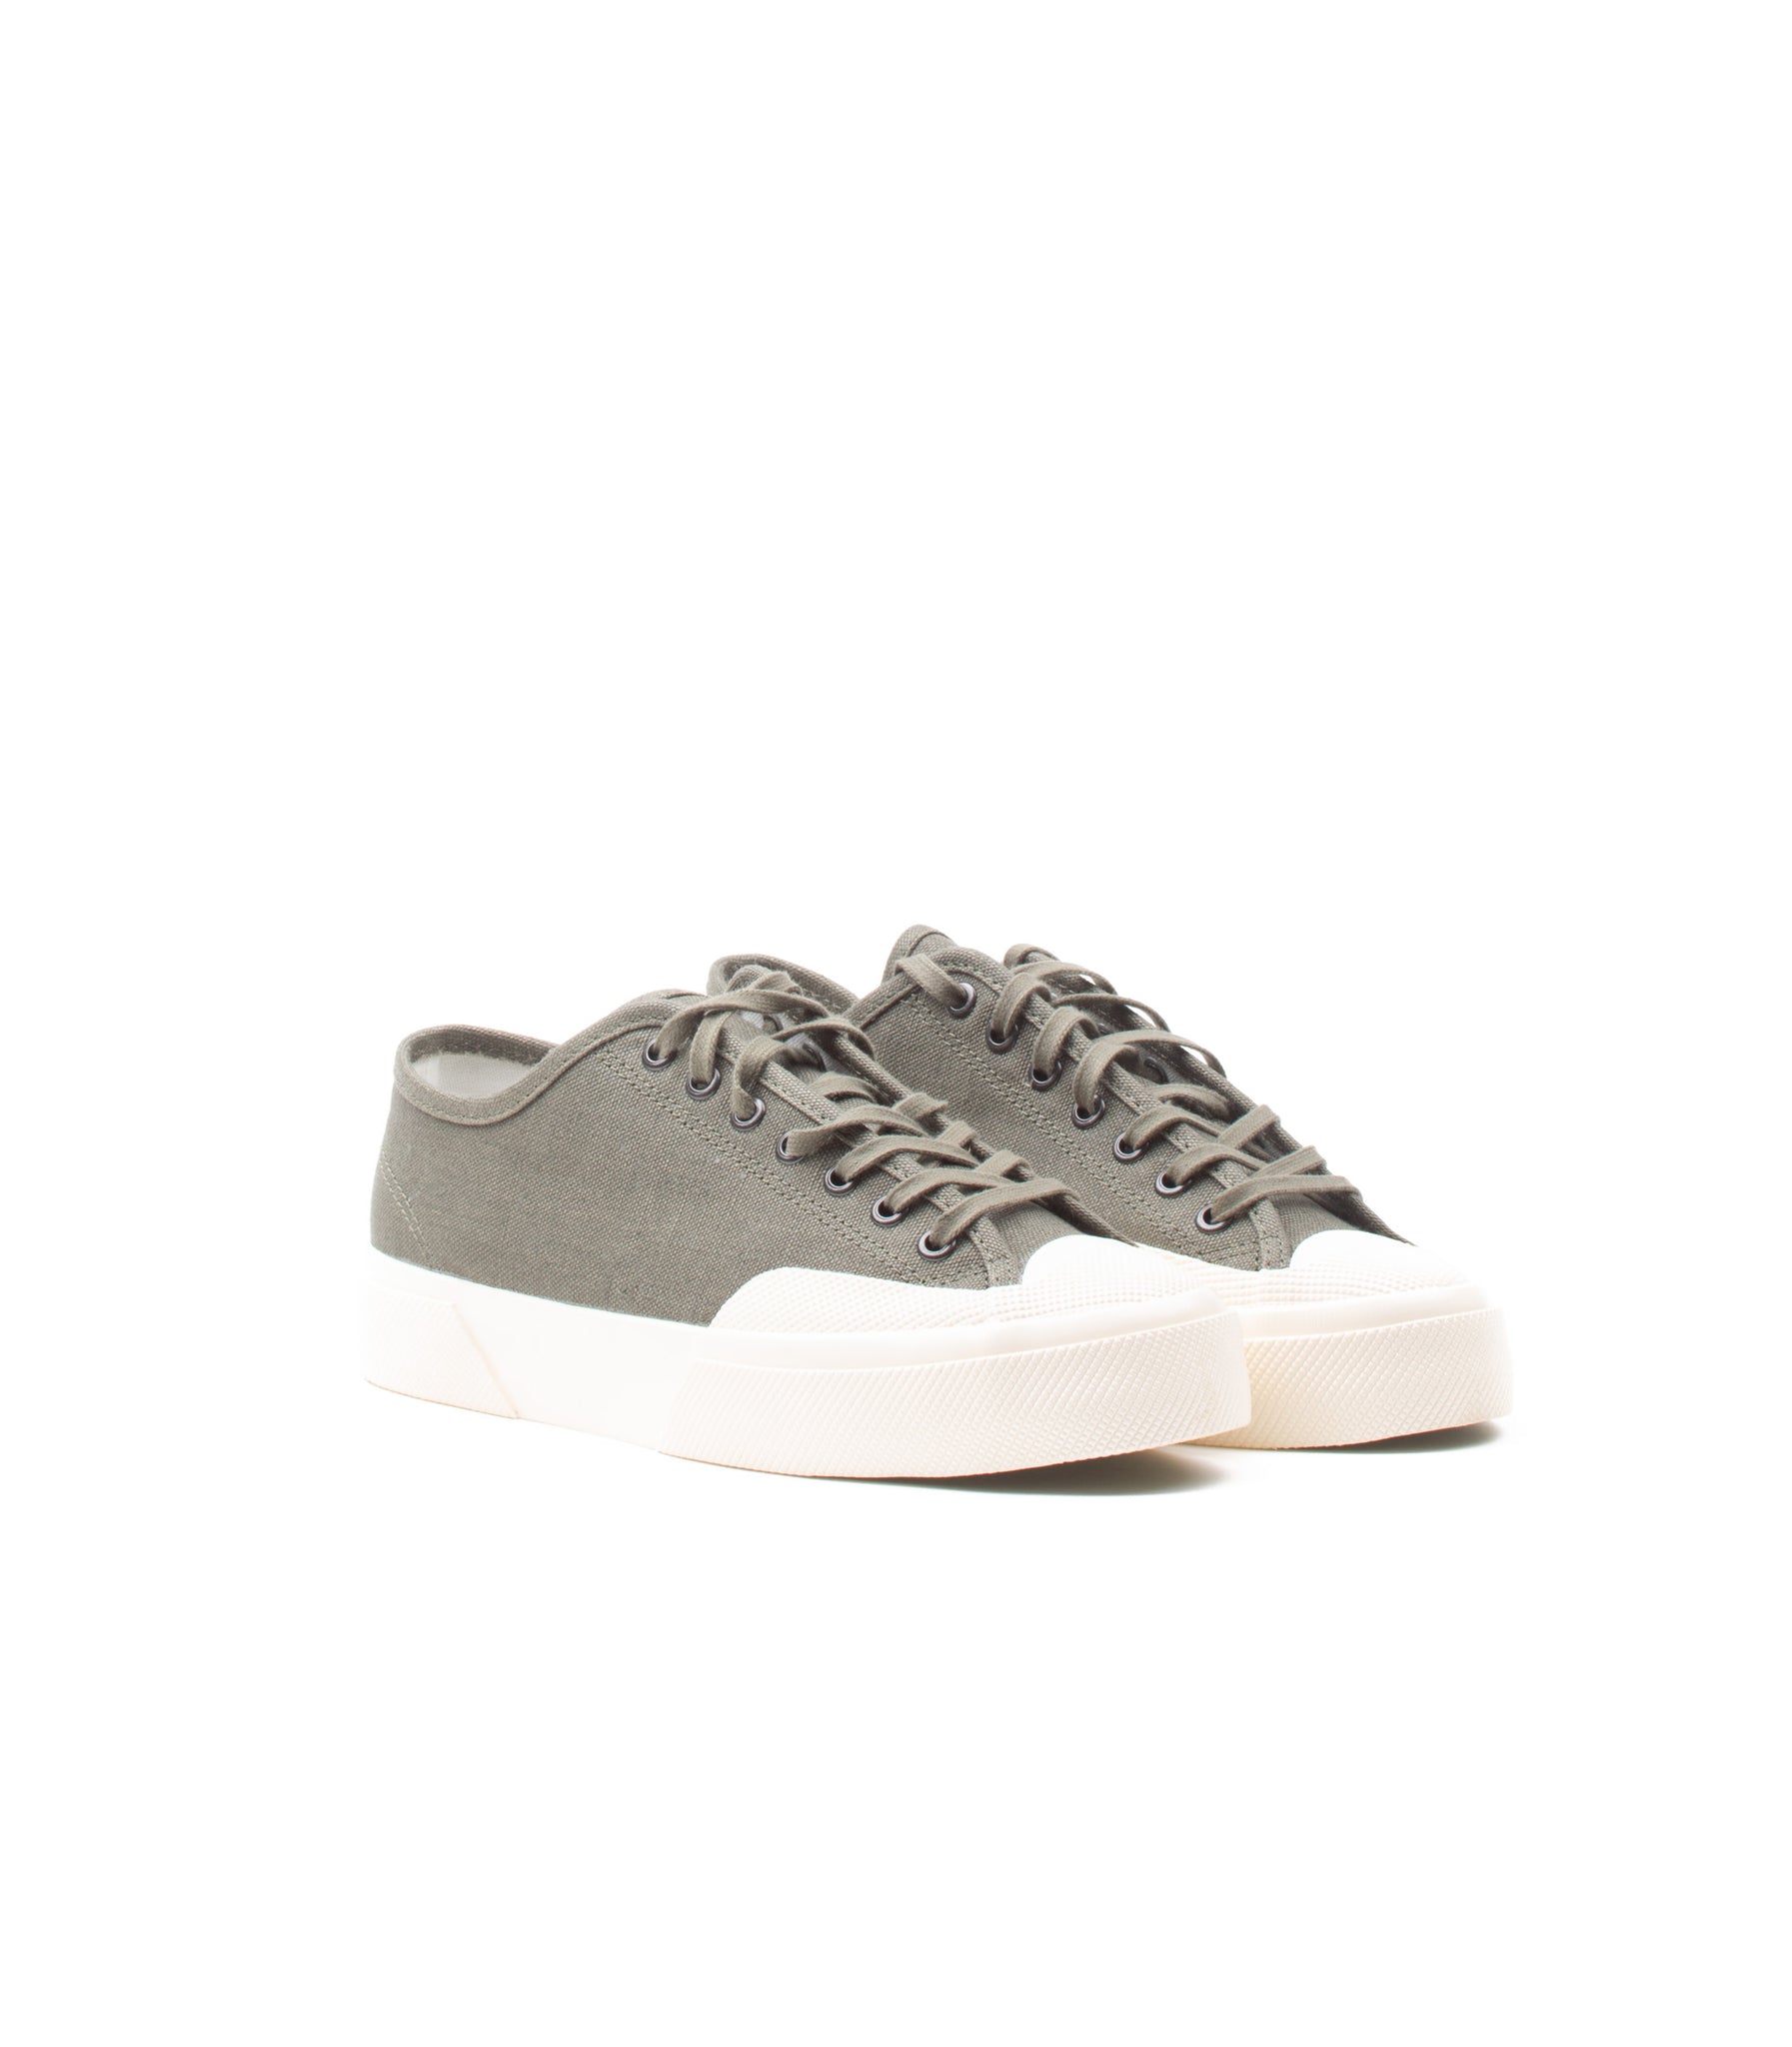 Superga 2432 Works Low Cut Deadstock French Cotton Verde Militare